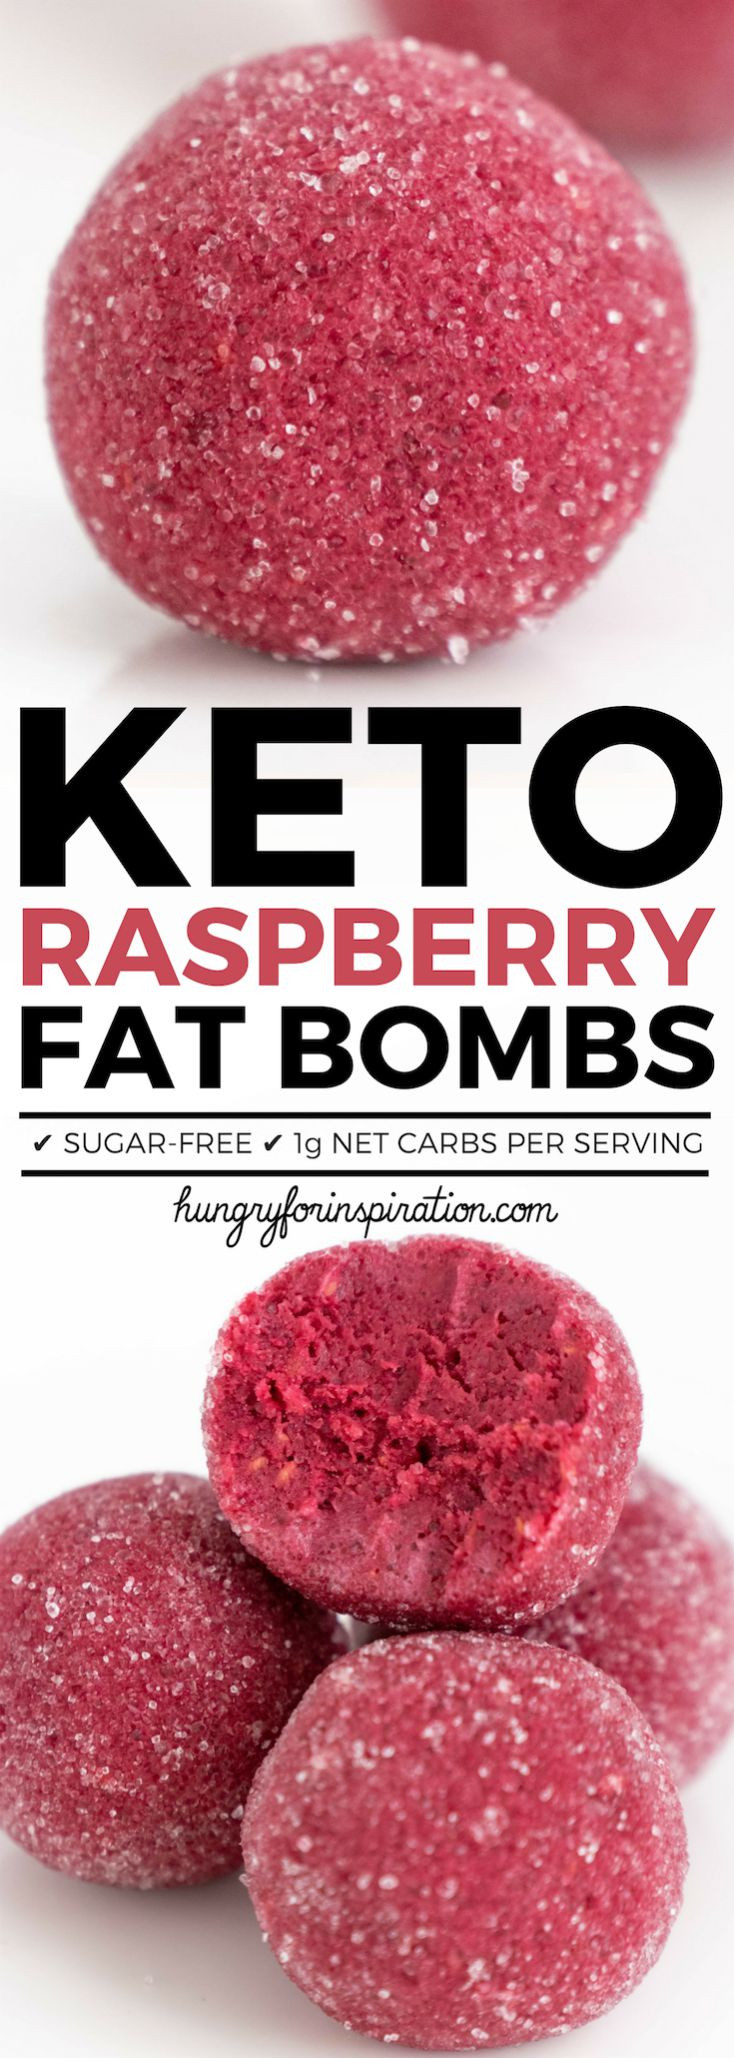 Healthy Keto Fat Bombs
 Healthy Keto Raspberry Fat Bombs Hungry For Inspiration